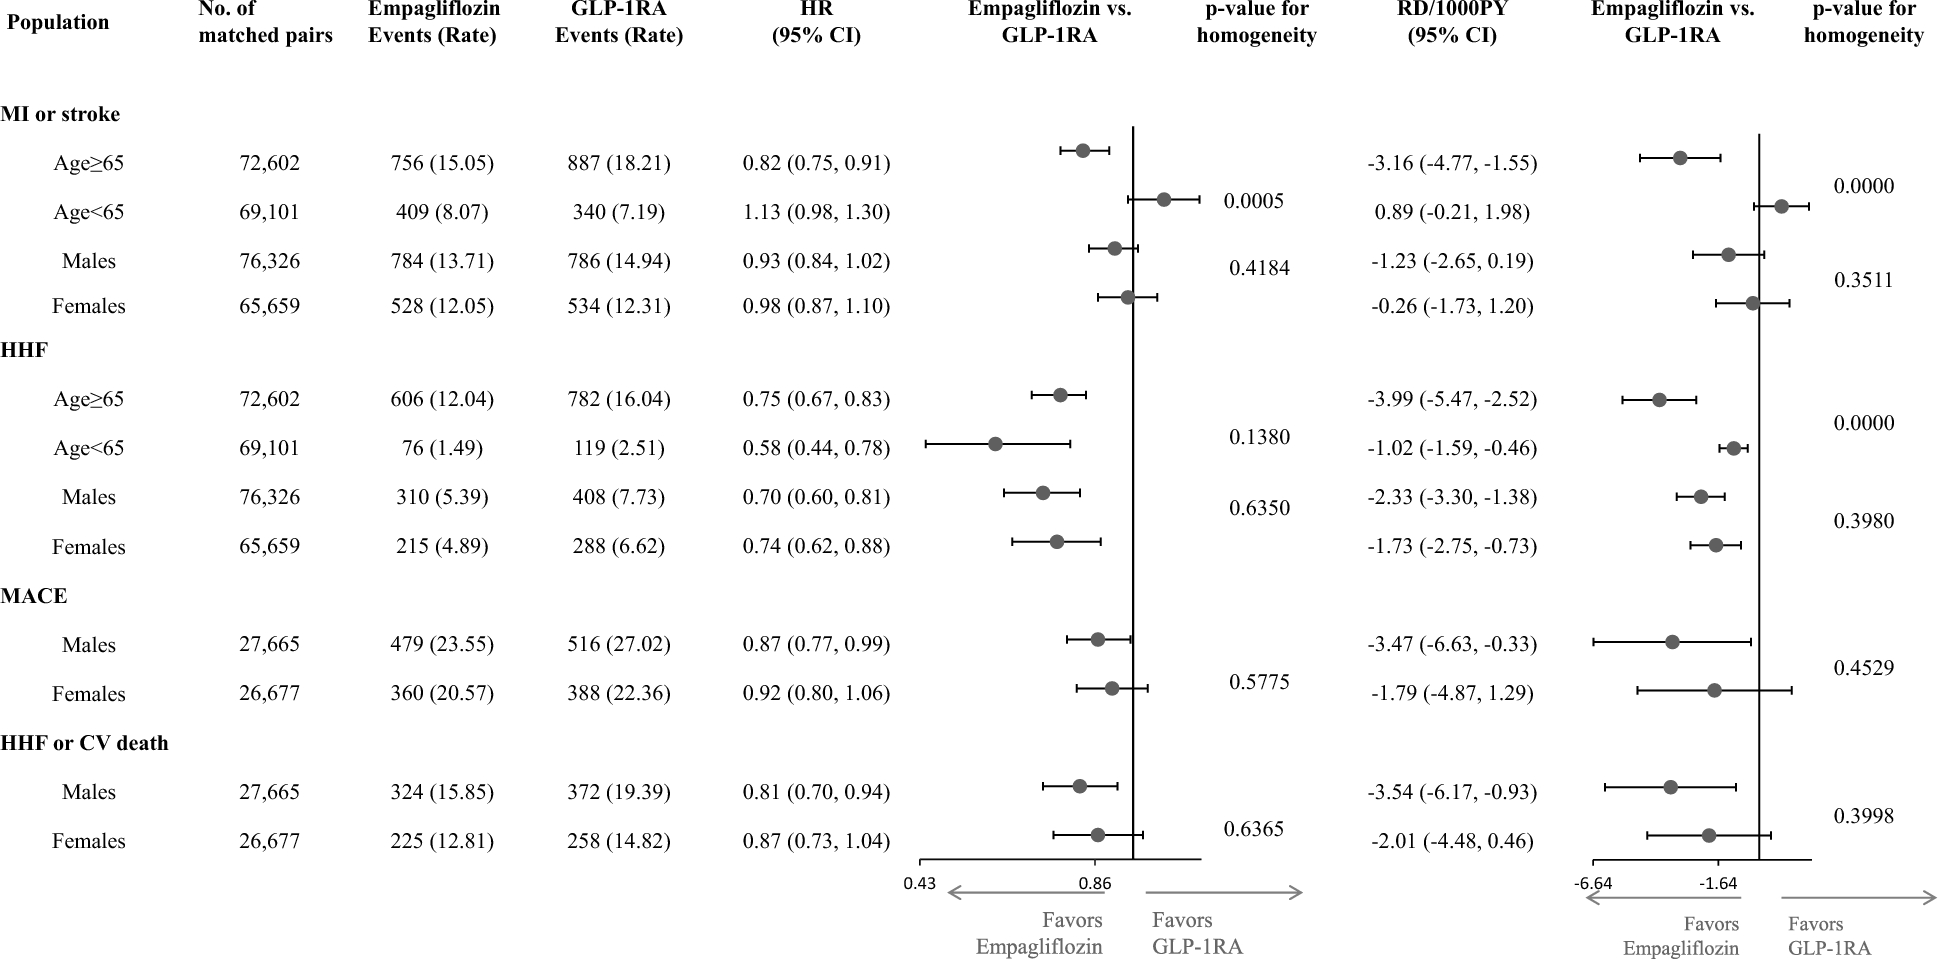 Correction: Cardiorenal effectiveness of empagliflozin vs. glucagon-like peptide-1 receptor agonists: final-year results from the EMPRISE study